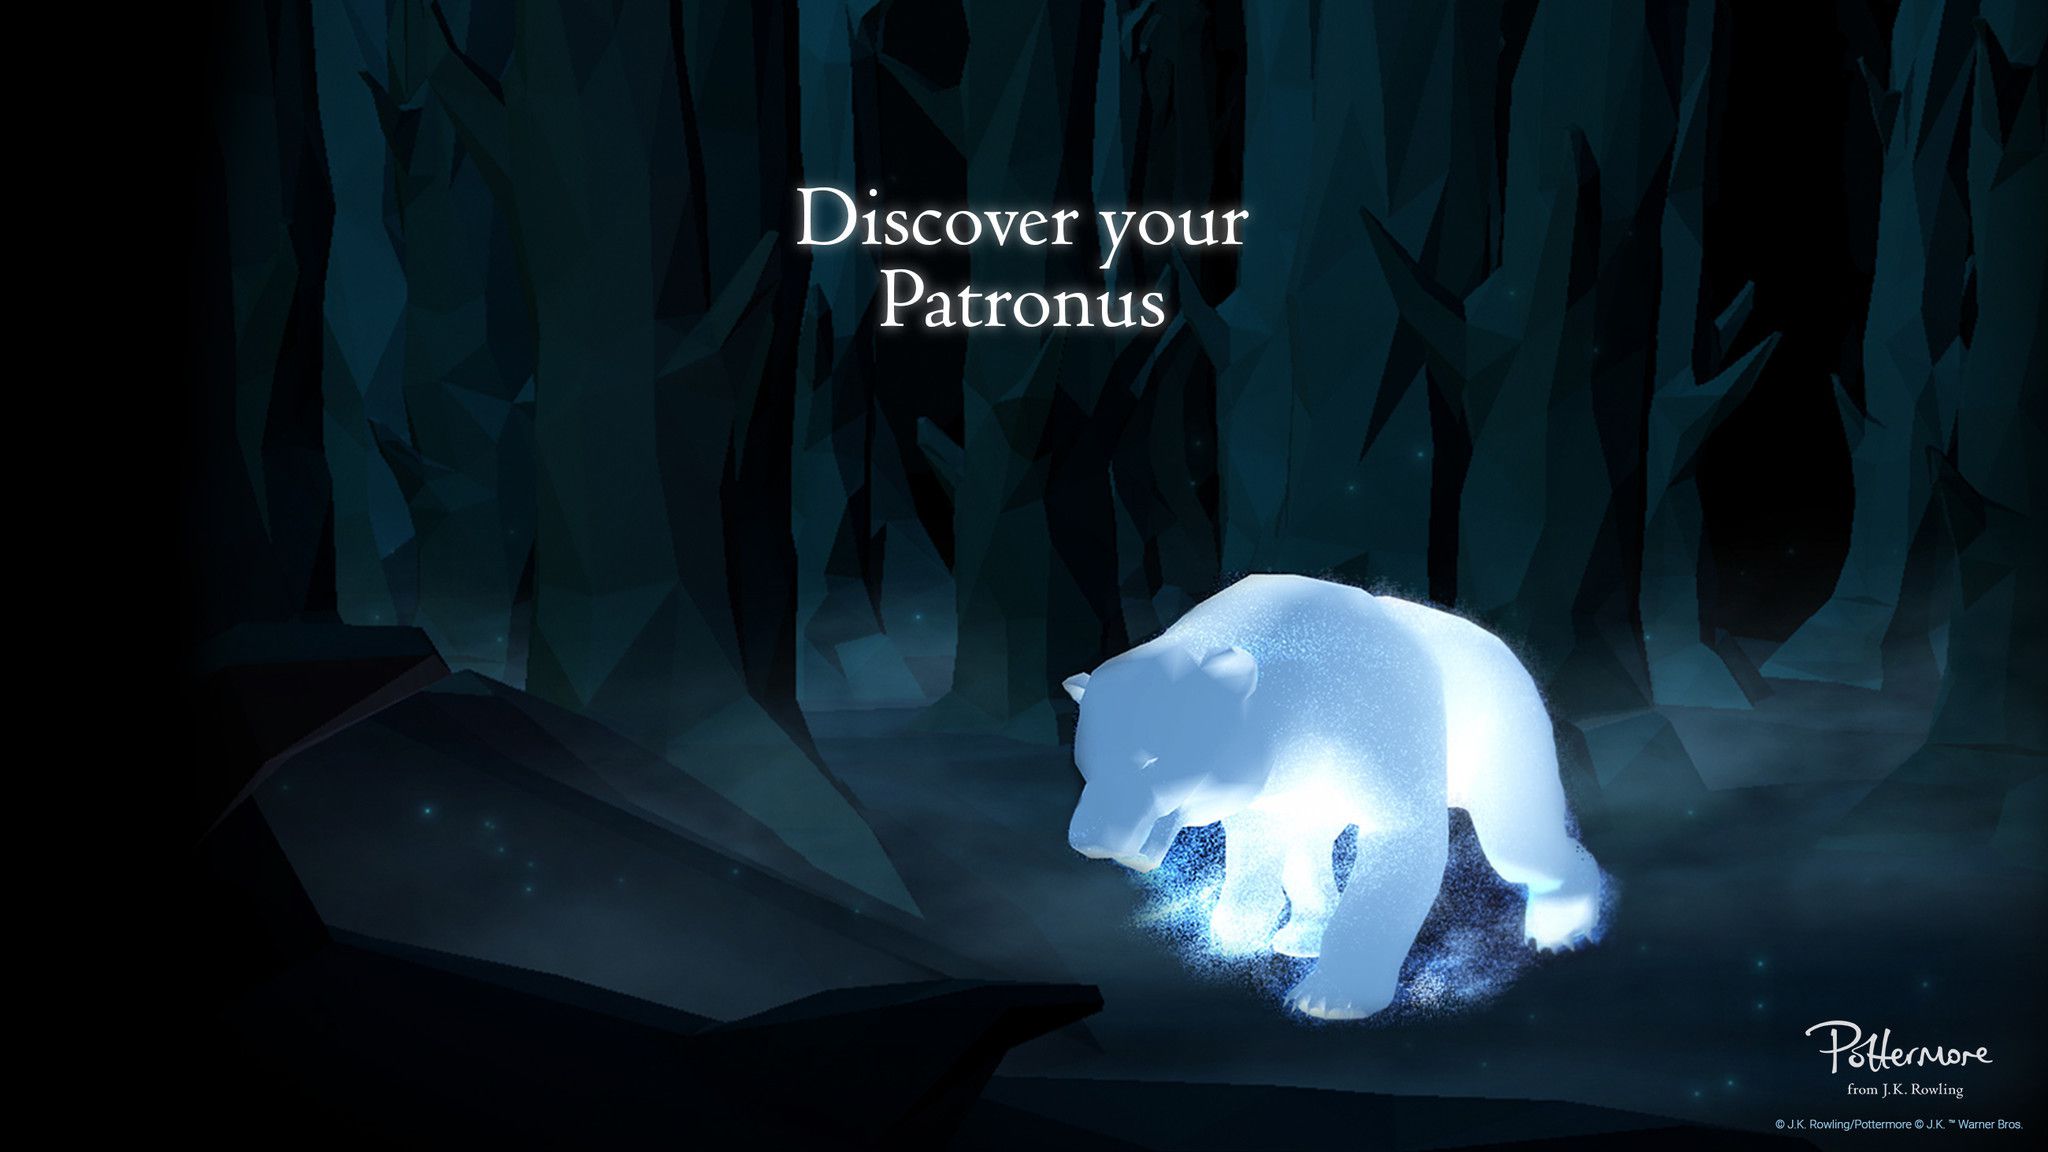 Wonder what your Patronus is? Now you can find out on Pottermore